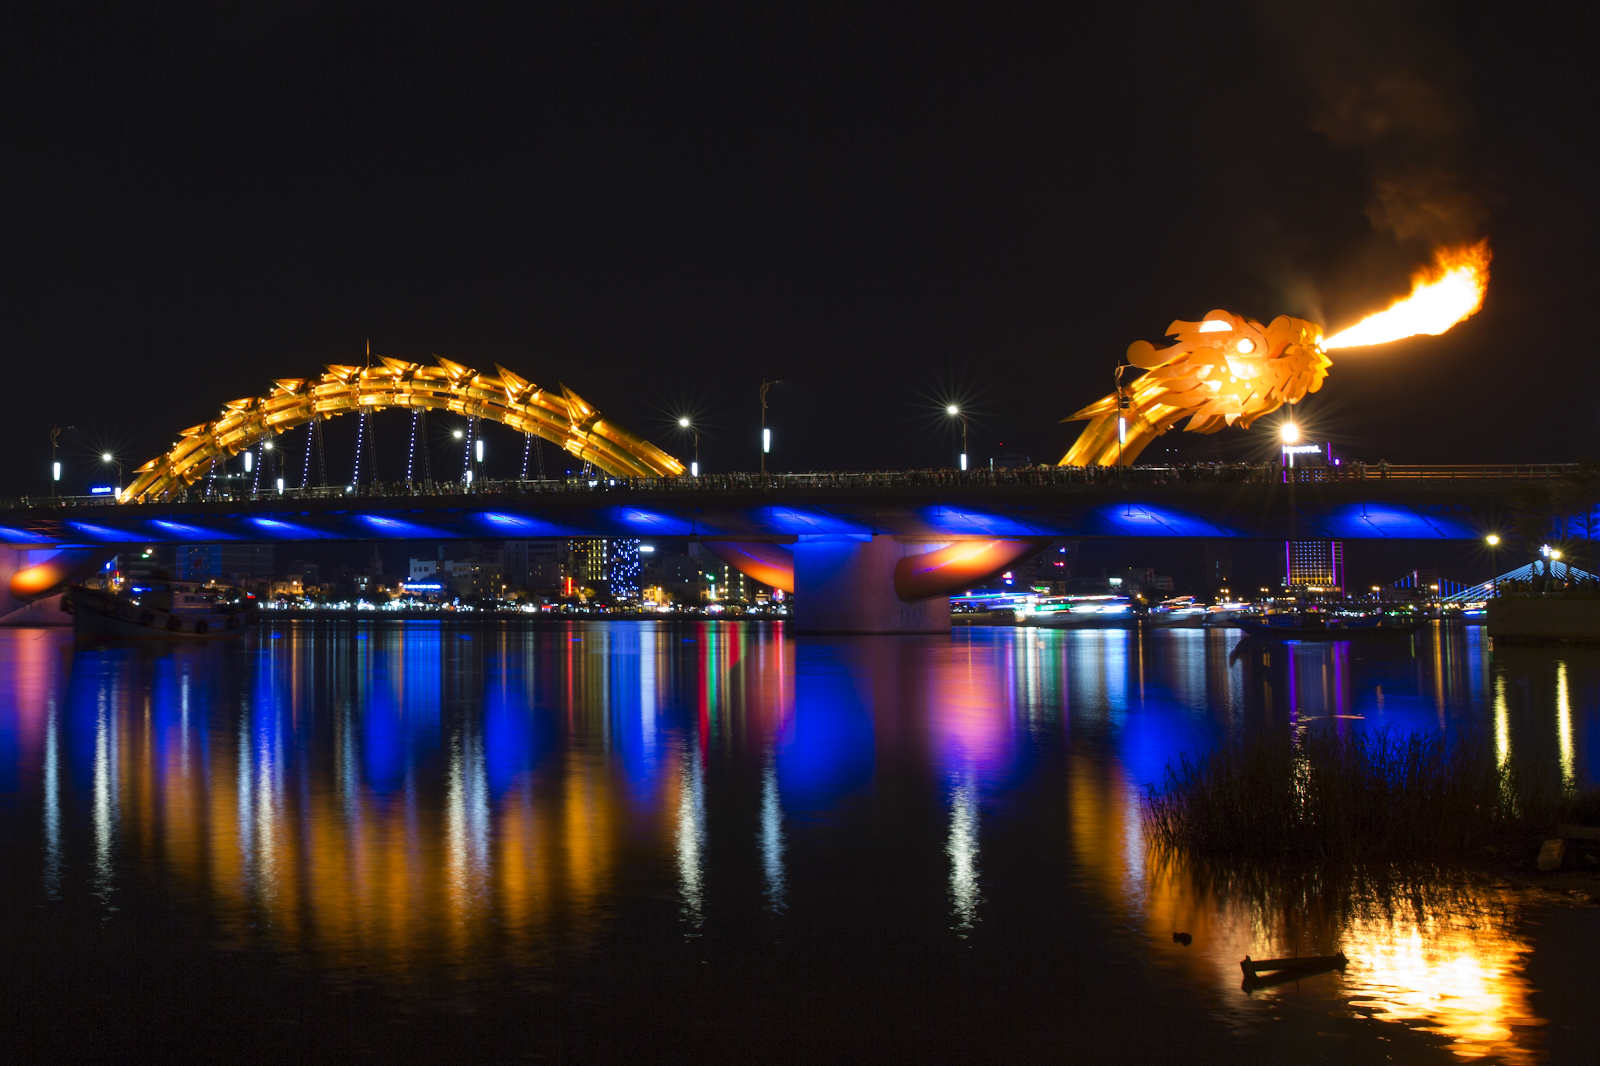 Dragon Bridge at night when the dragon spits out fire